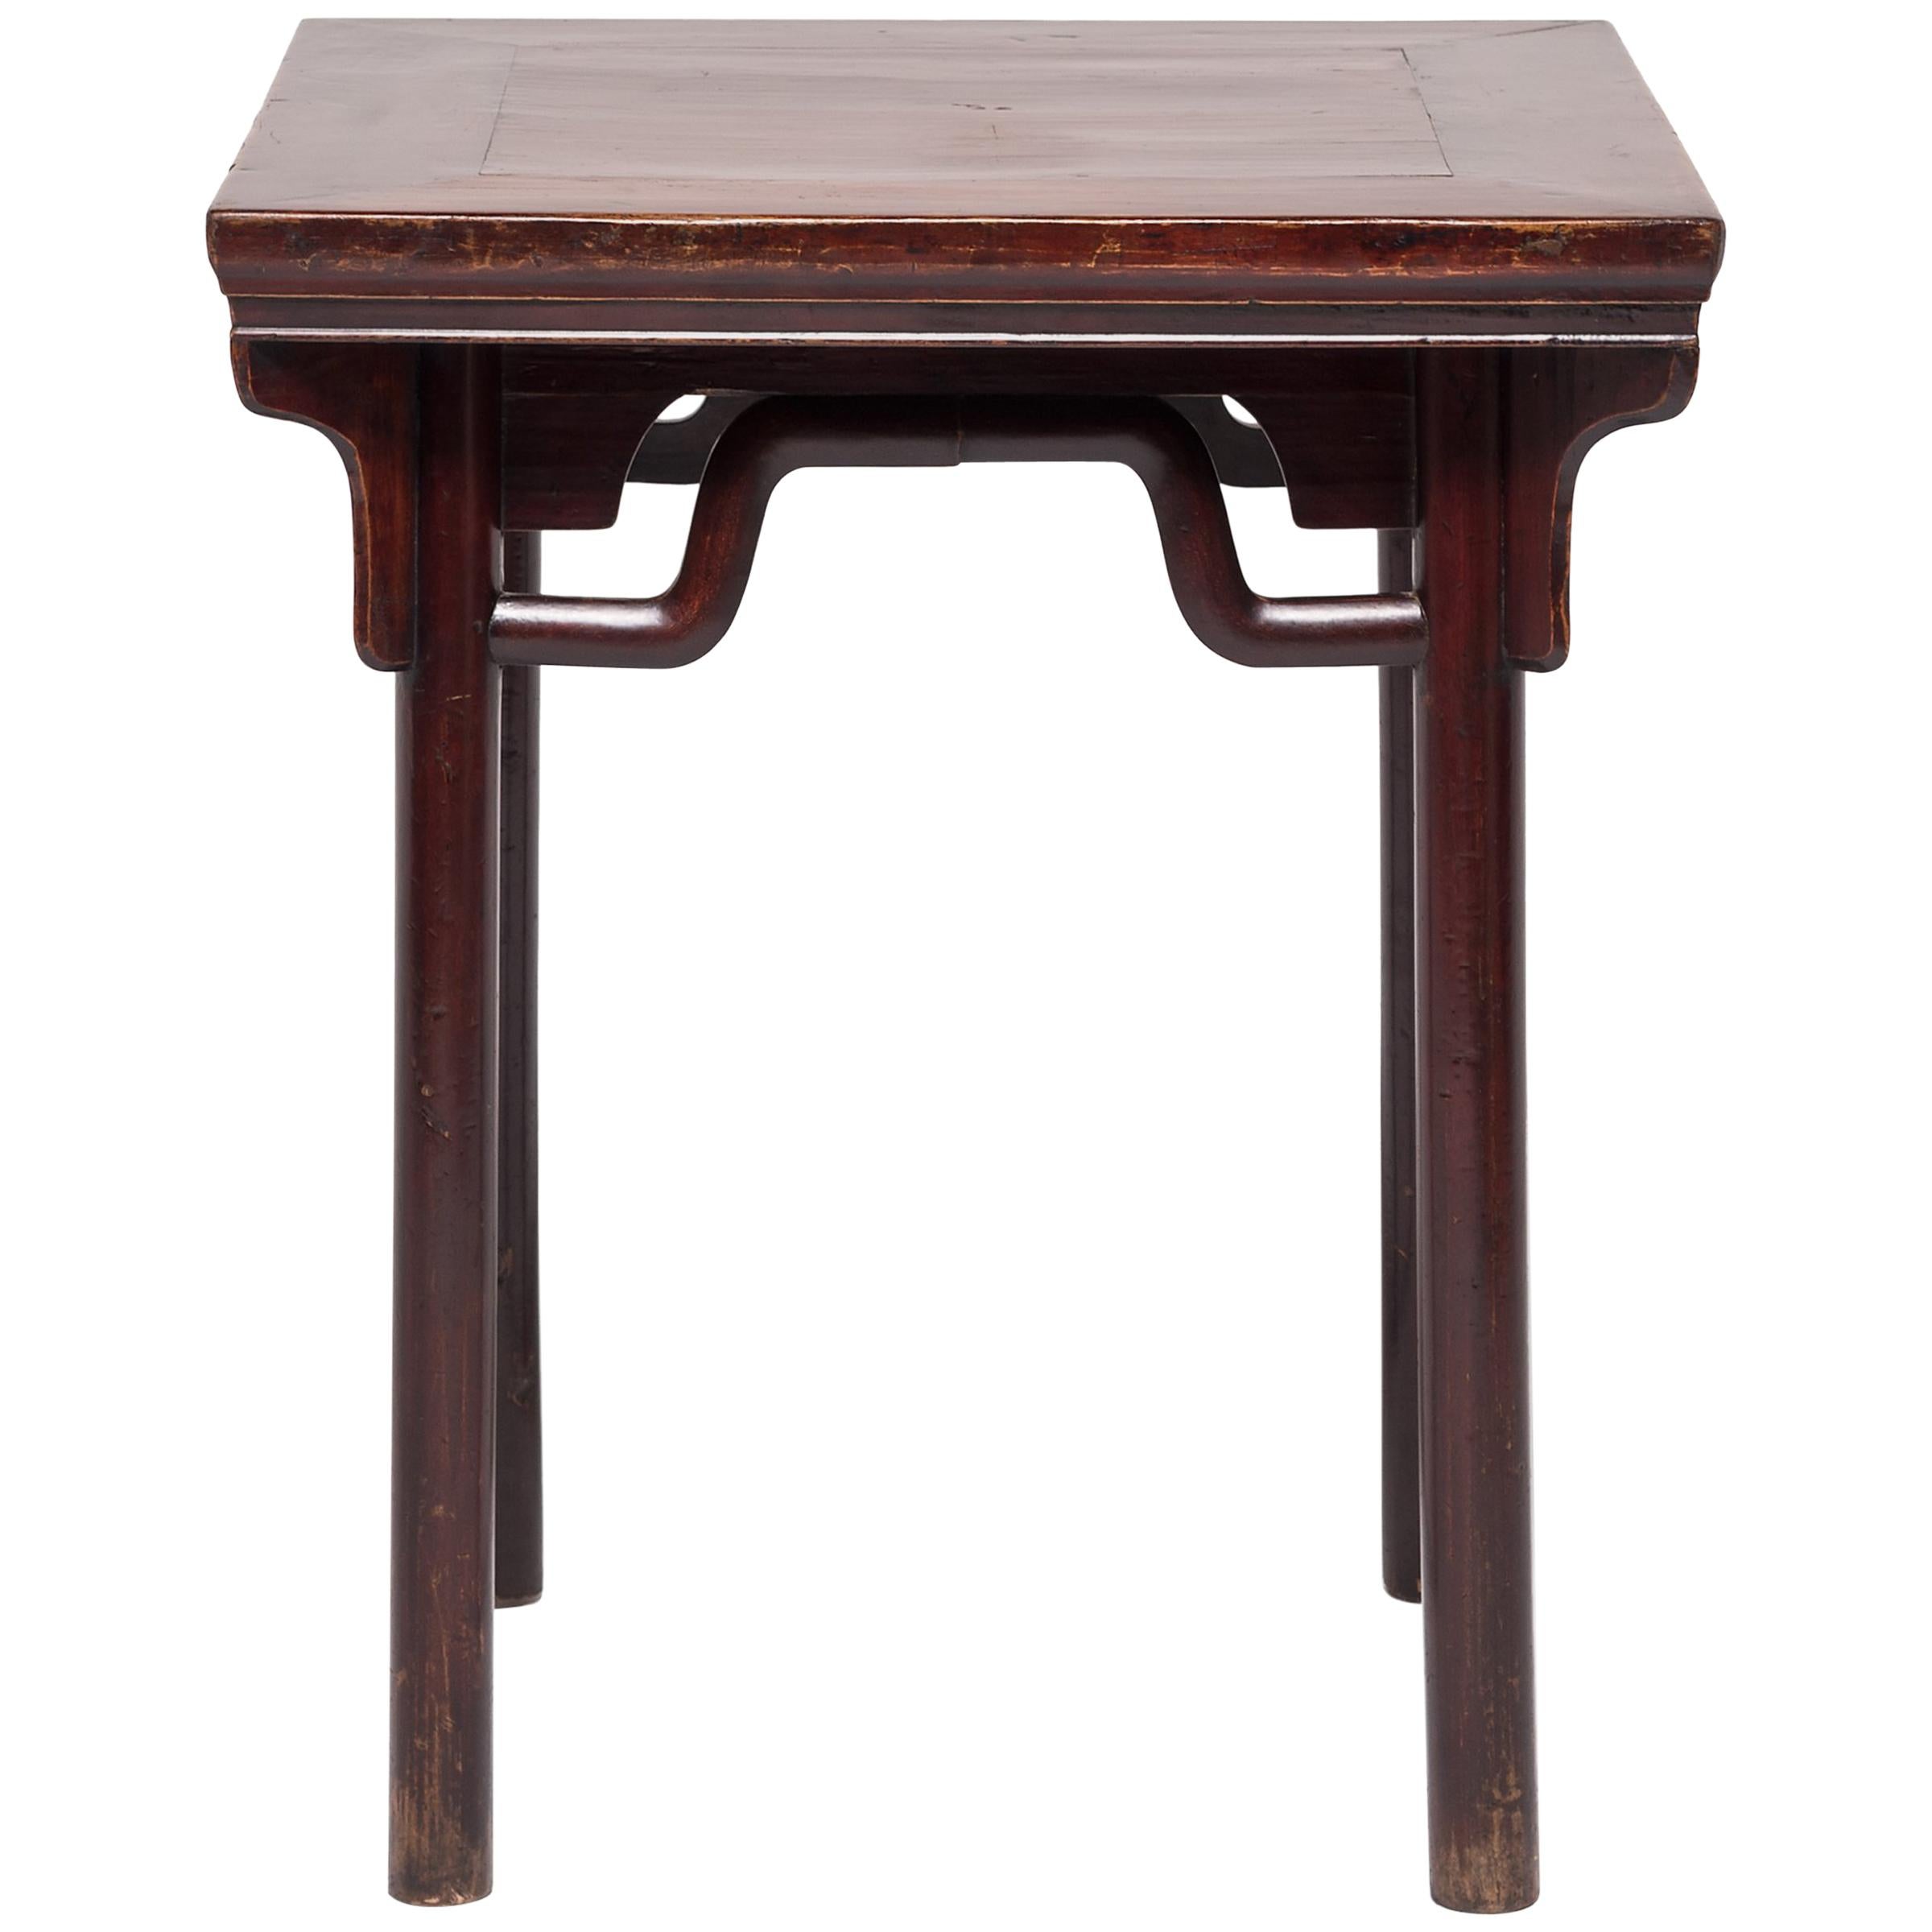 19th Century Chinese Square Table with Humpback Stretchers